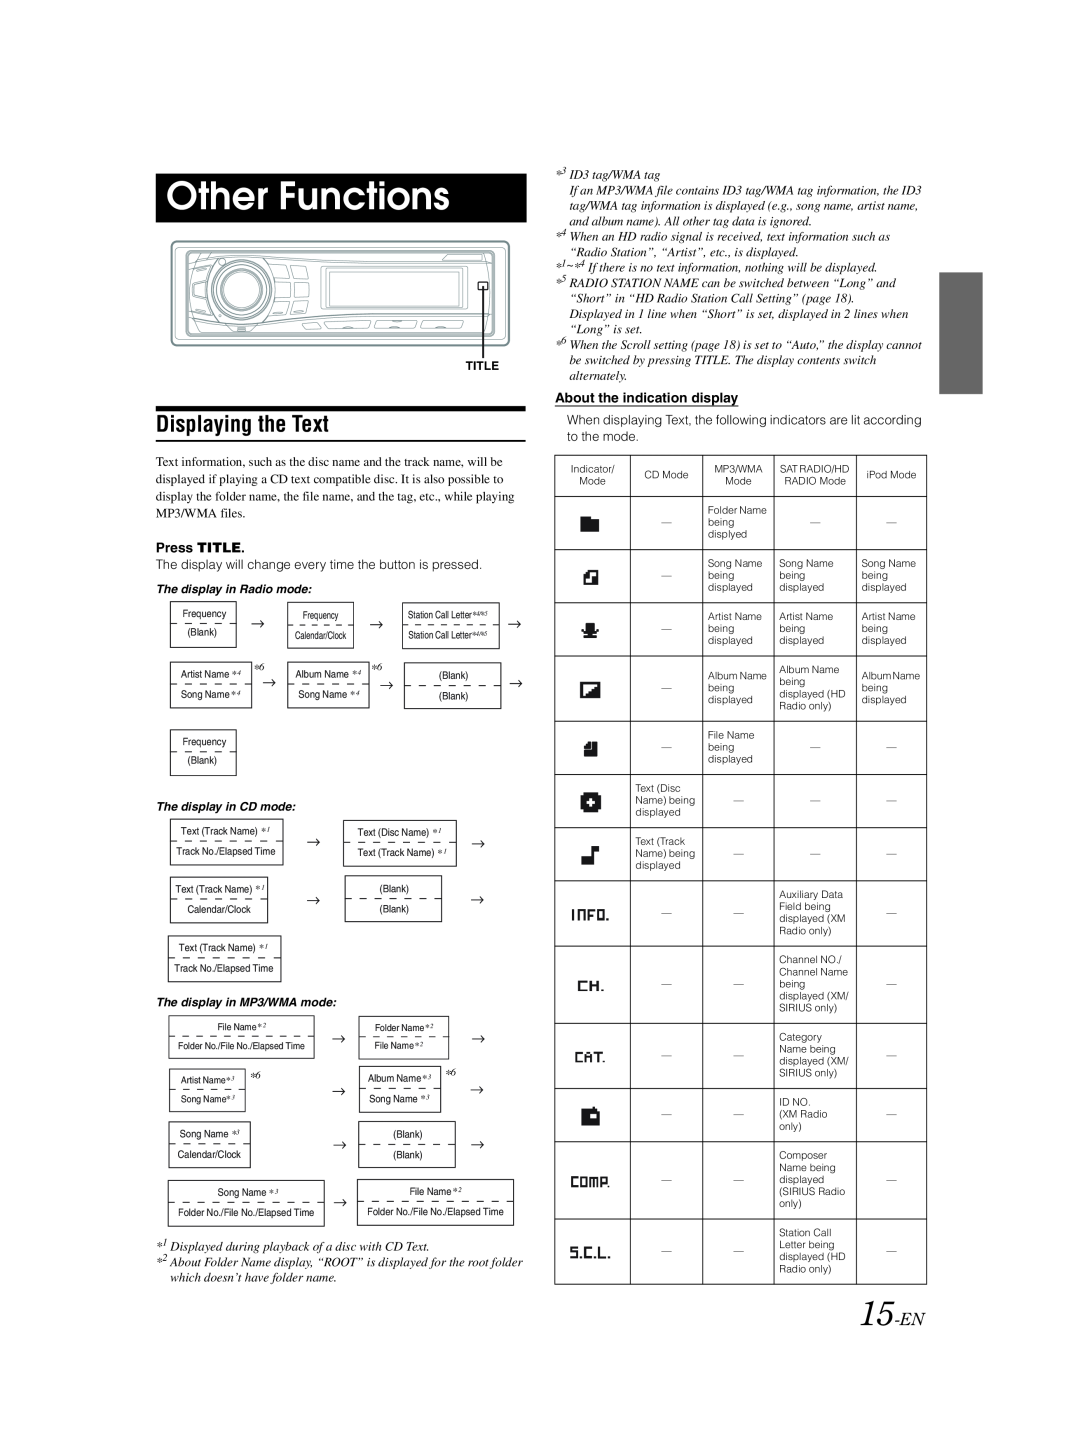 Alpine CDA-9857 owner manual Other Functions, Displaying the Text, 15-EN 